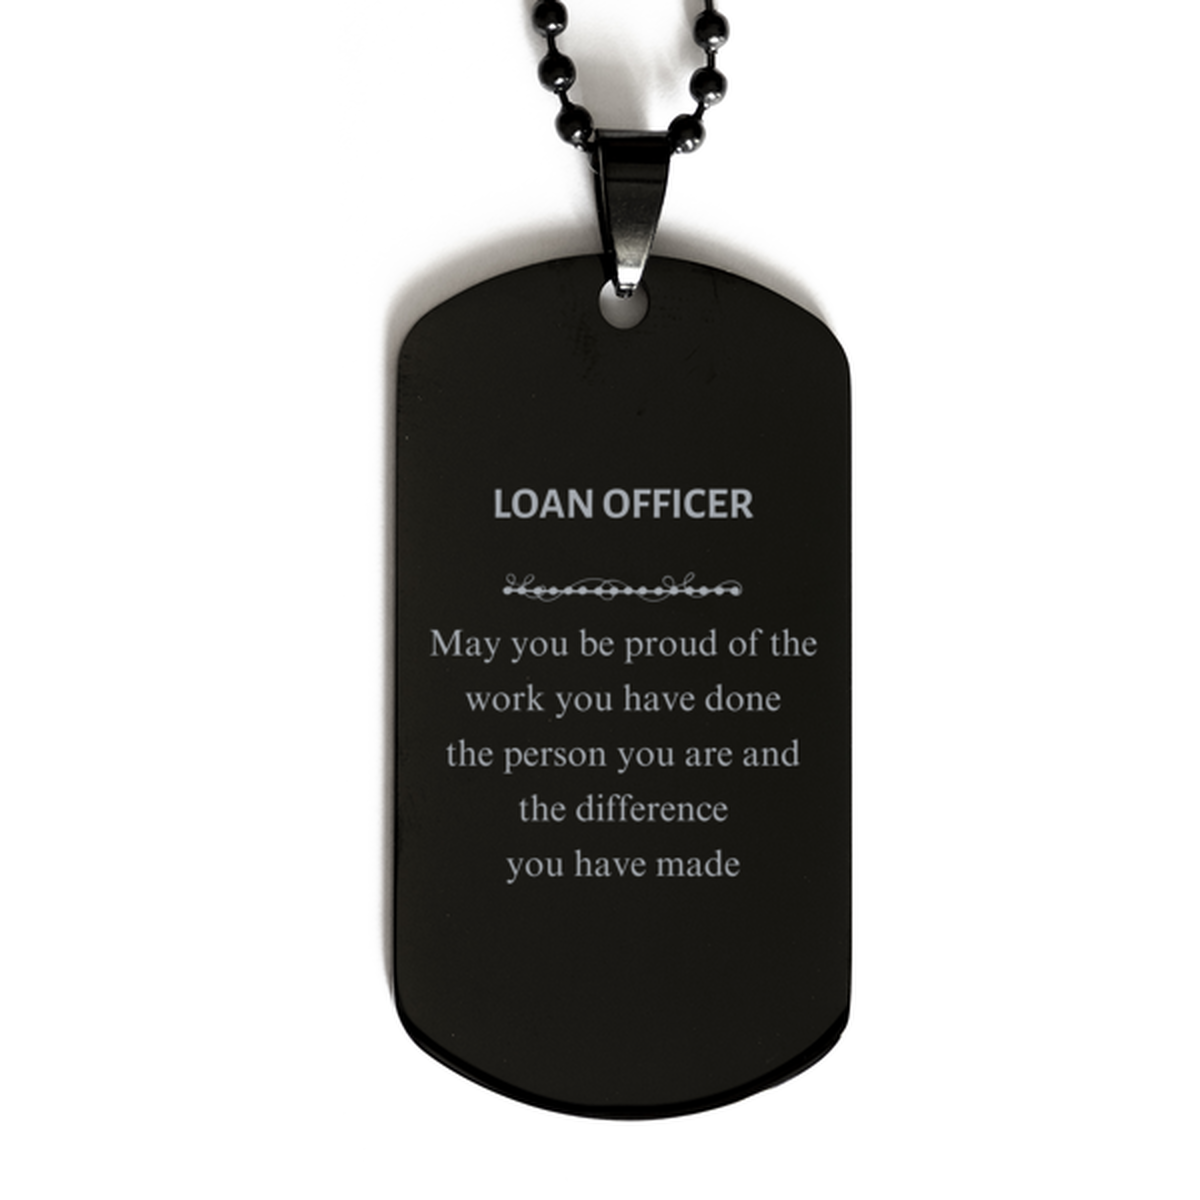 Loan Officer May you be proud of the work you have done, Retirement Loan Officer Black Dog Tag for Colleague Appreciation Gifts Amazing for Loan Officer